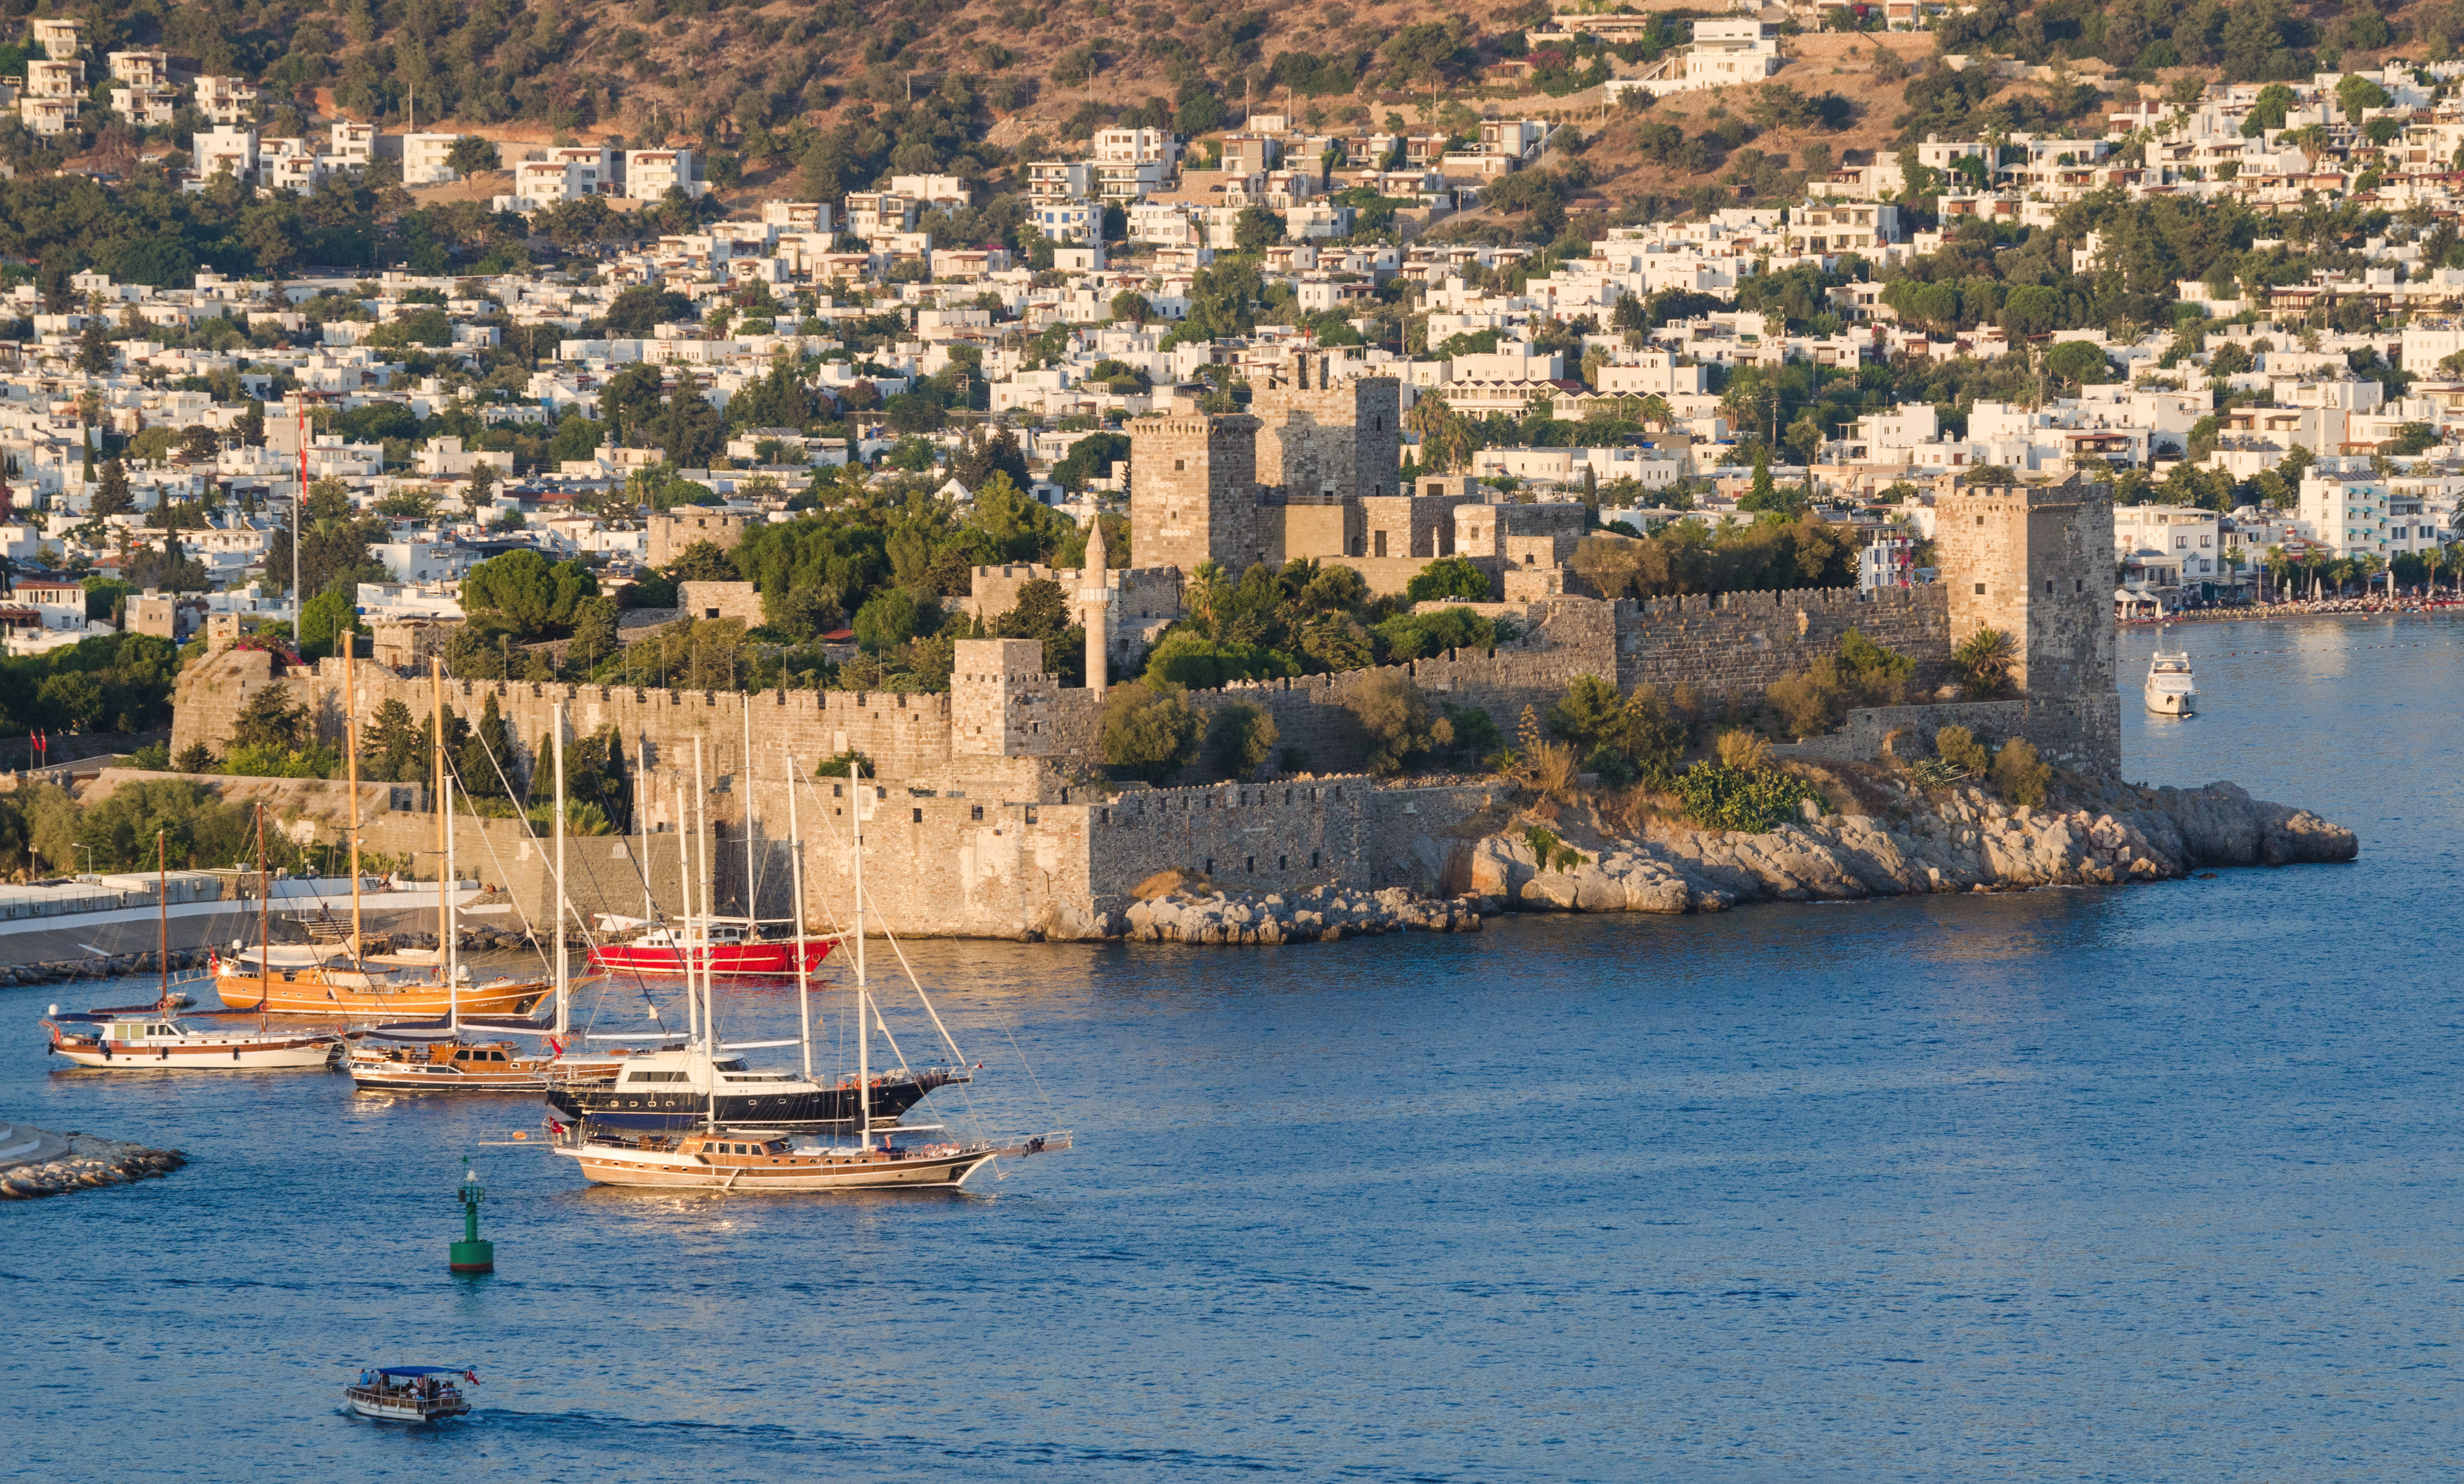 Top things to do in Bodrum to experience history and nature.